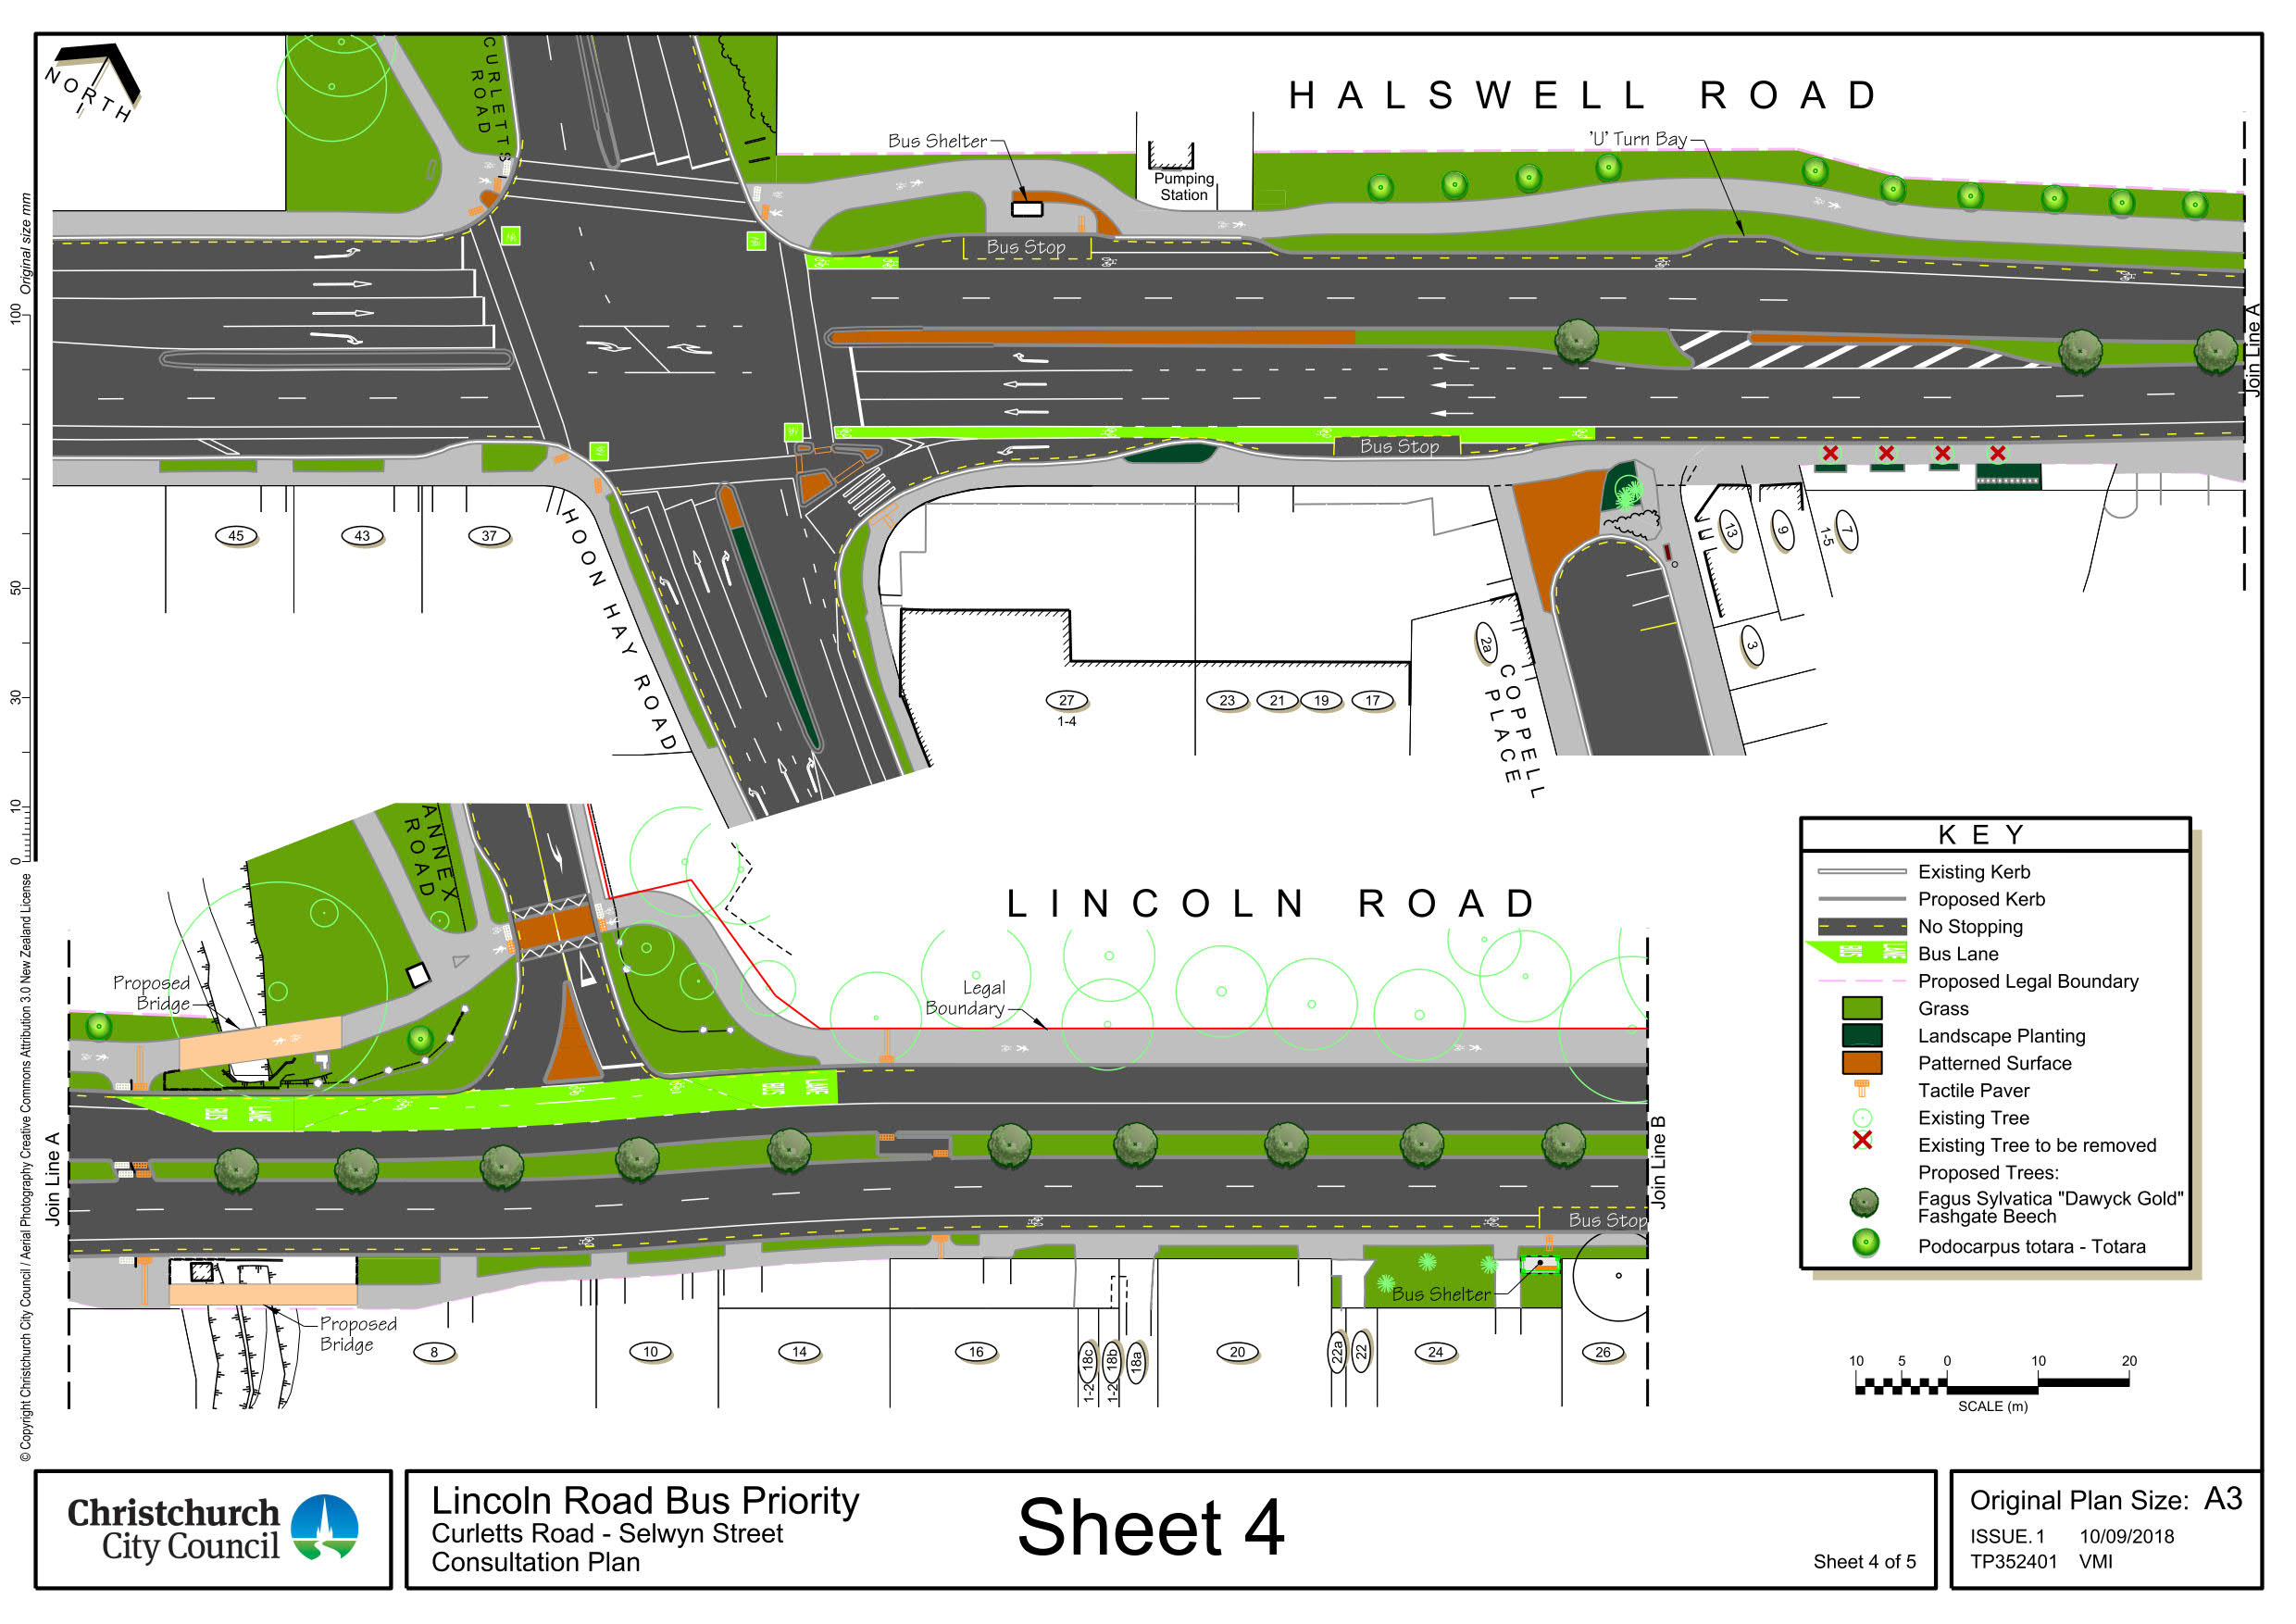 Future project - Whiteleigh Avenue to Wrights Road